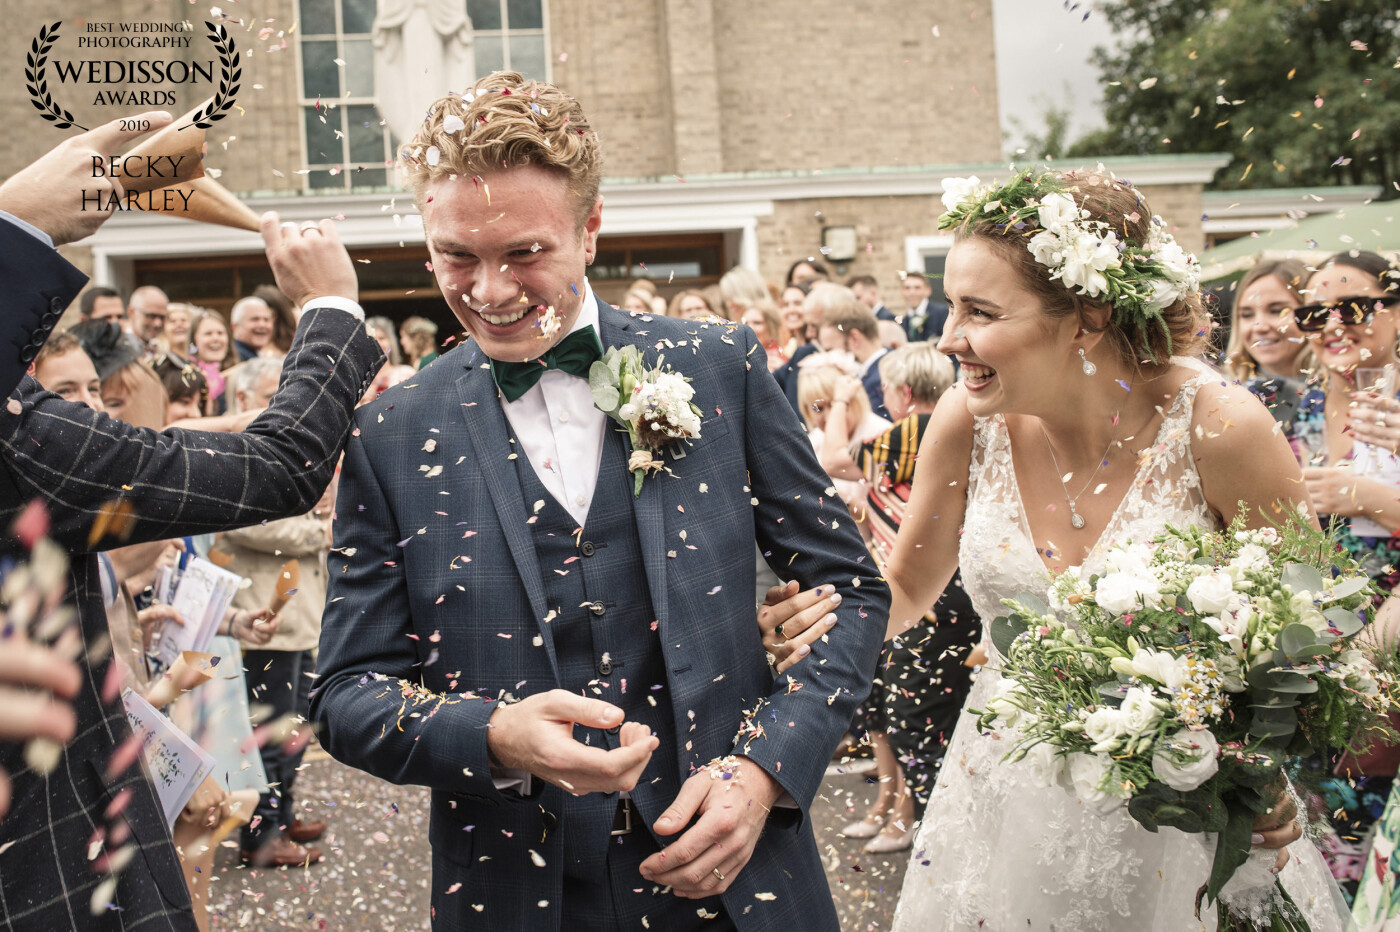 Laura and Ben exiting the church after their ceremony in Welwyn Garden City - to clouds of confetti!! I love this shot and the happiness that exudes from this awesome couple.